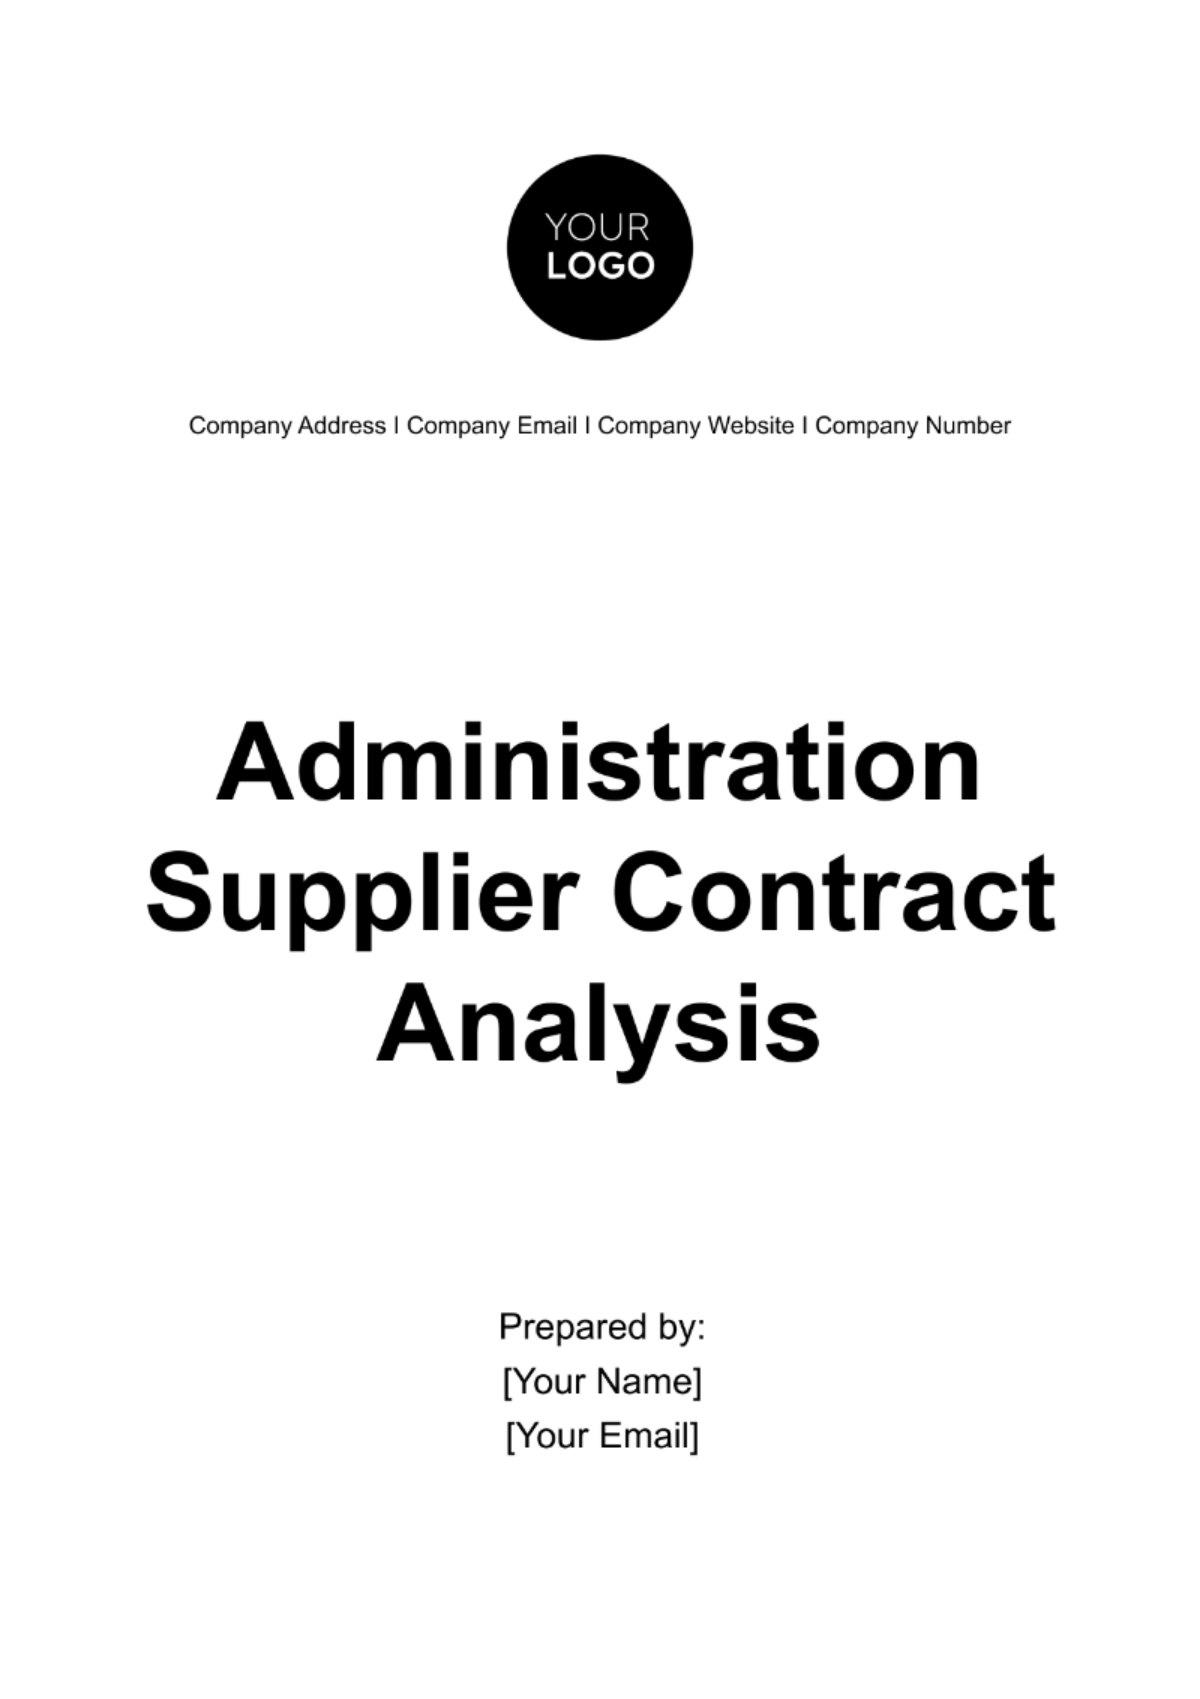 Administration Supplier Contract Analysis Template